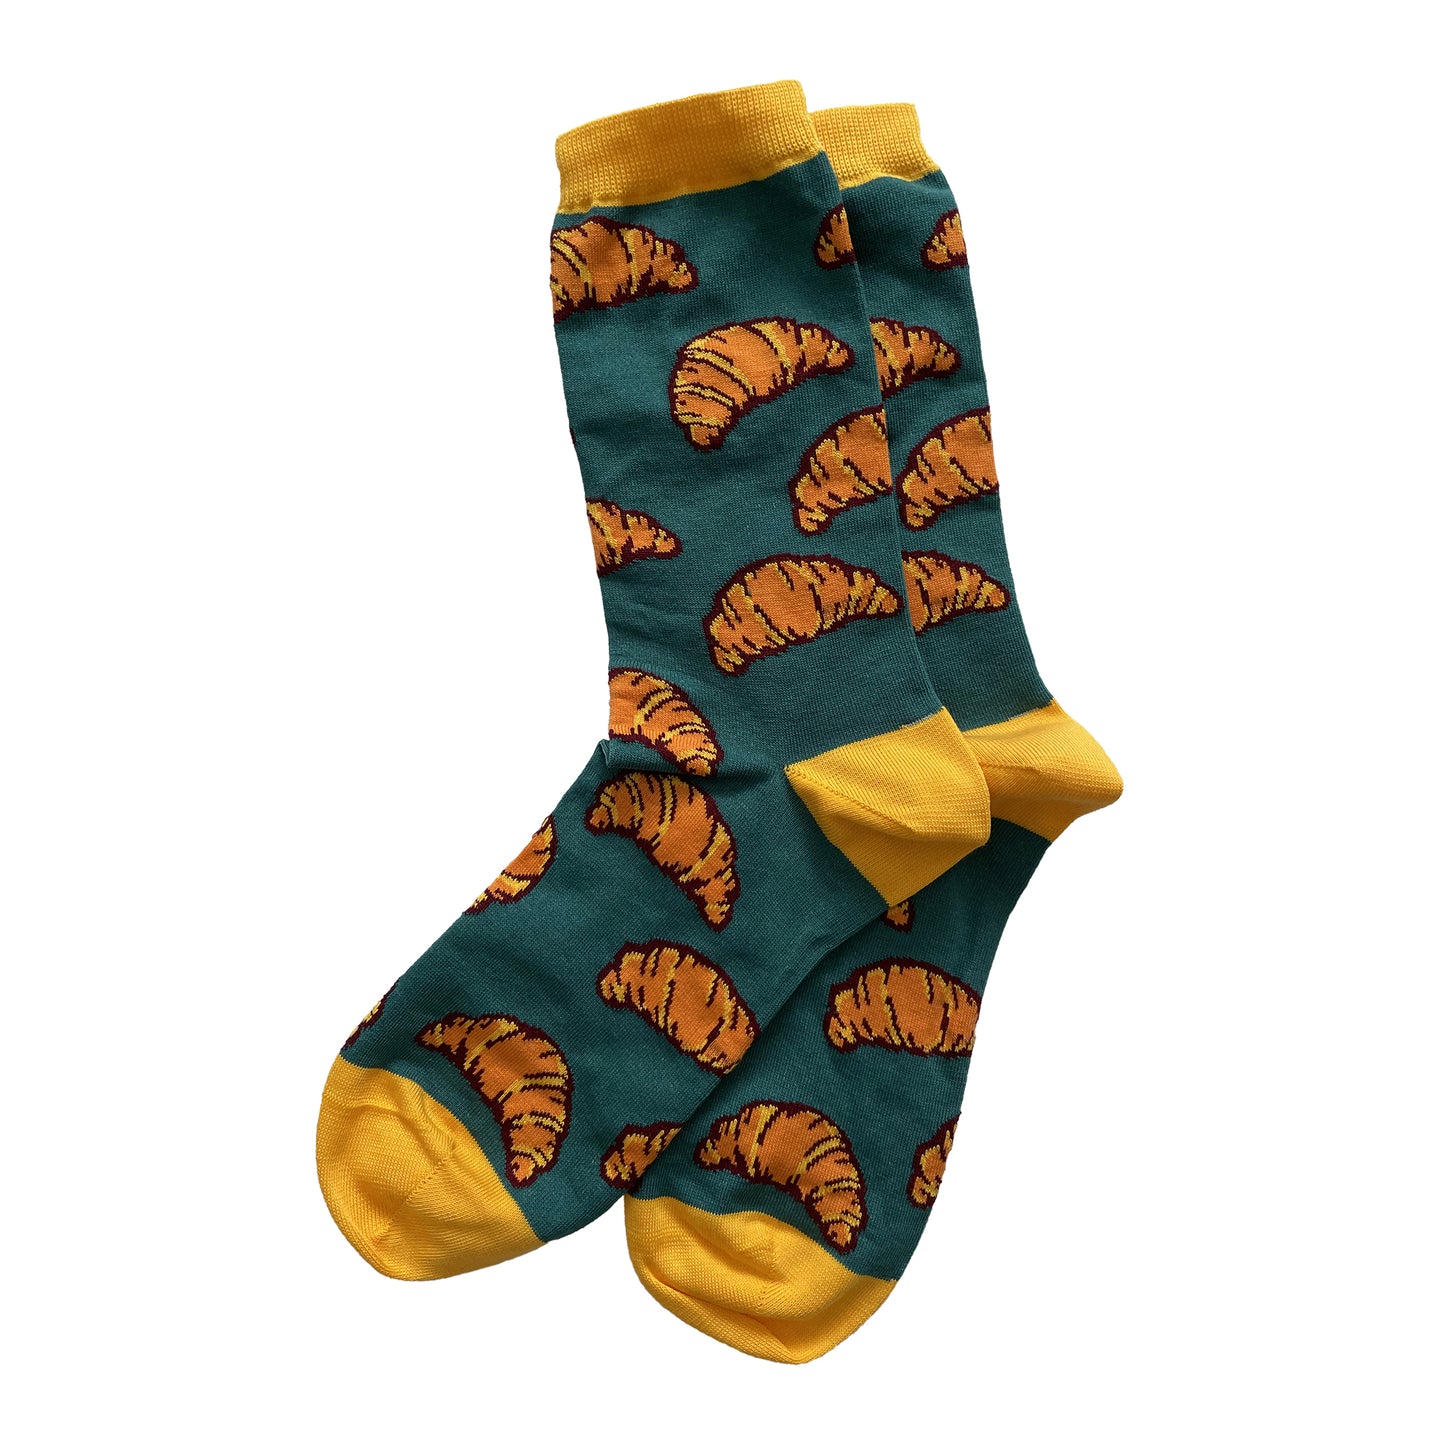 A pair of dark green socks is patterned with orange-and-yellow croissants with dark brown outlines. The cuffs, heels, and toes of the socks are yellow.